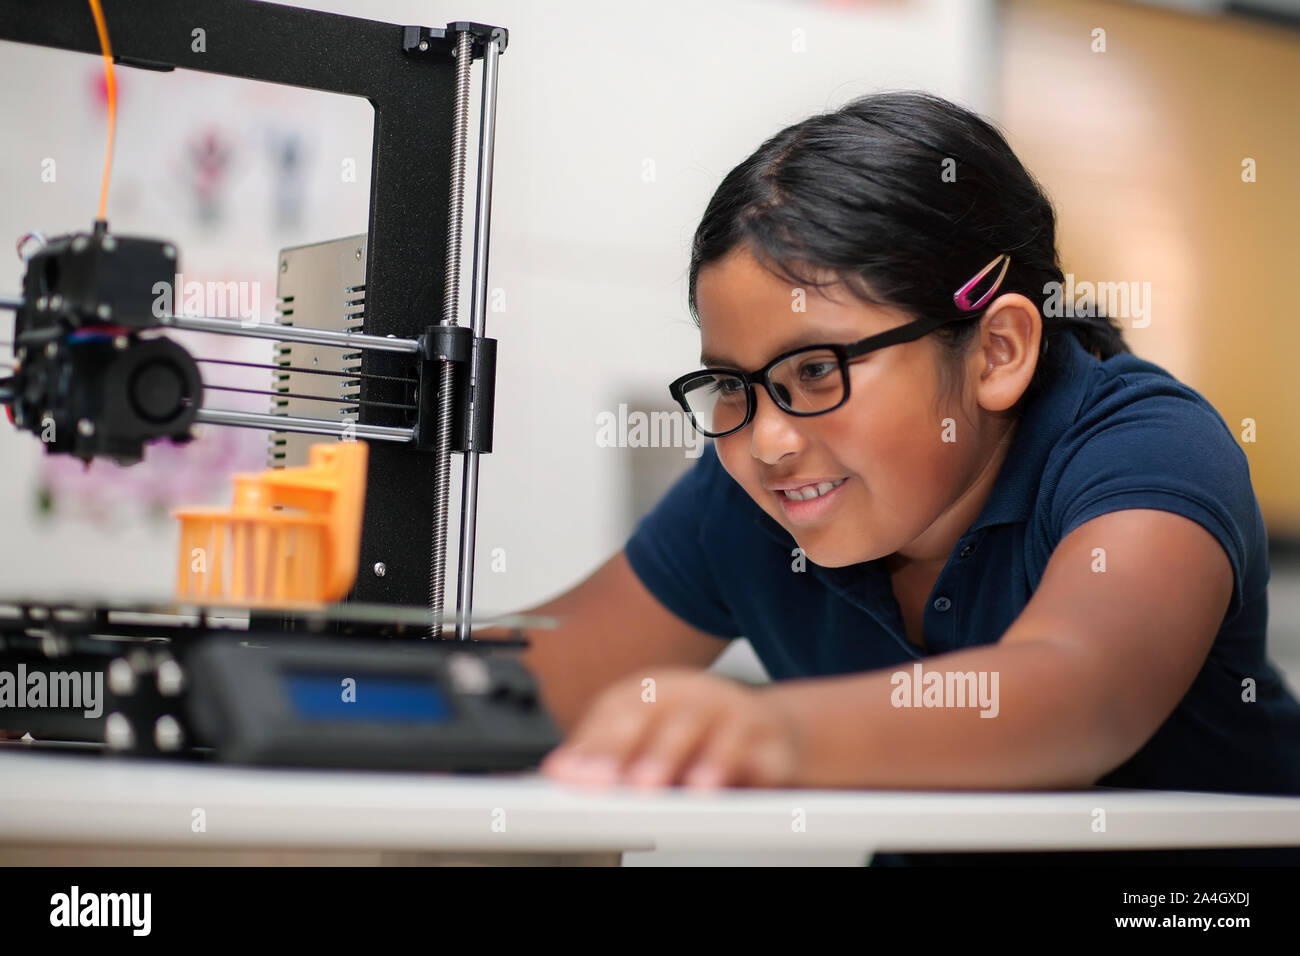 A happy young girl wearing glasses and watching a 3d printer finish the 3d model she created. Stock Photo